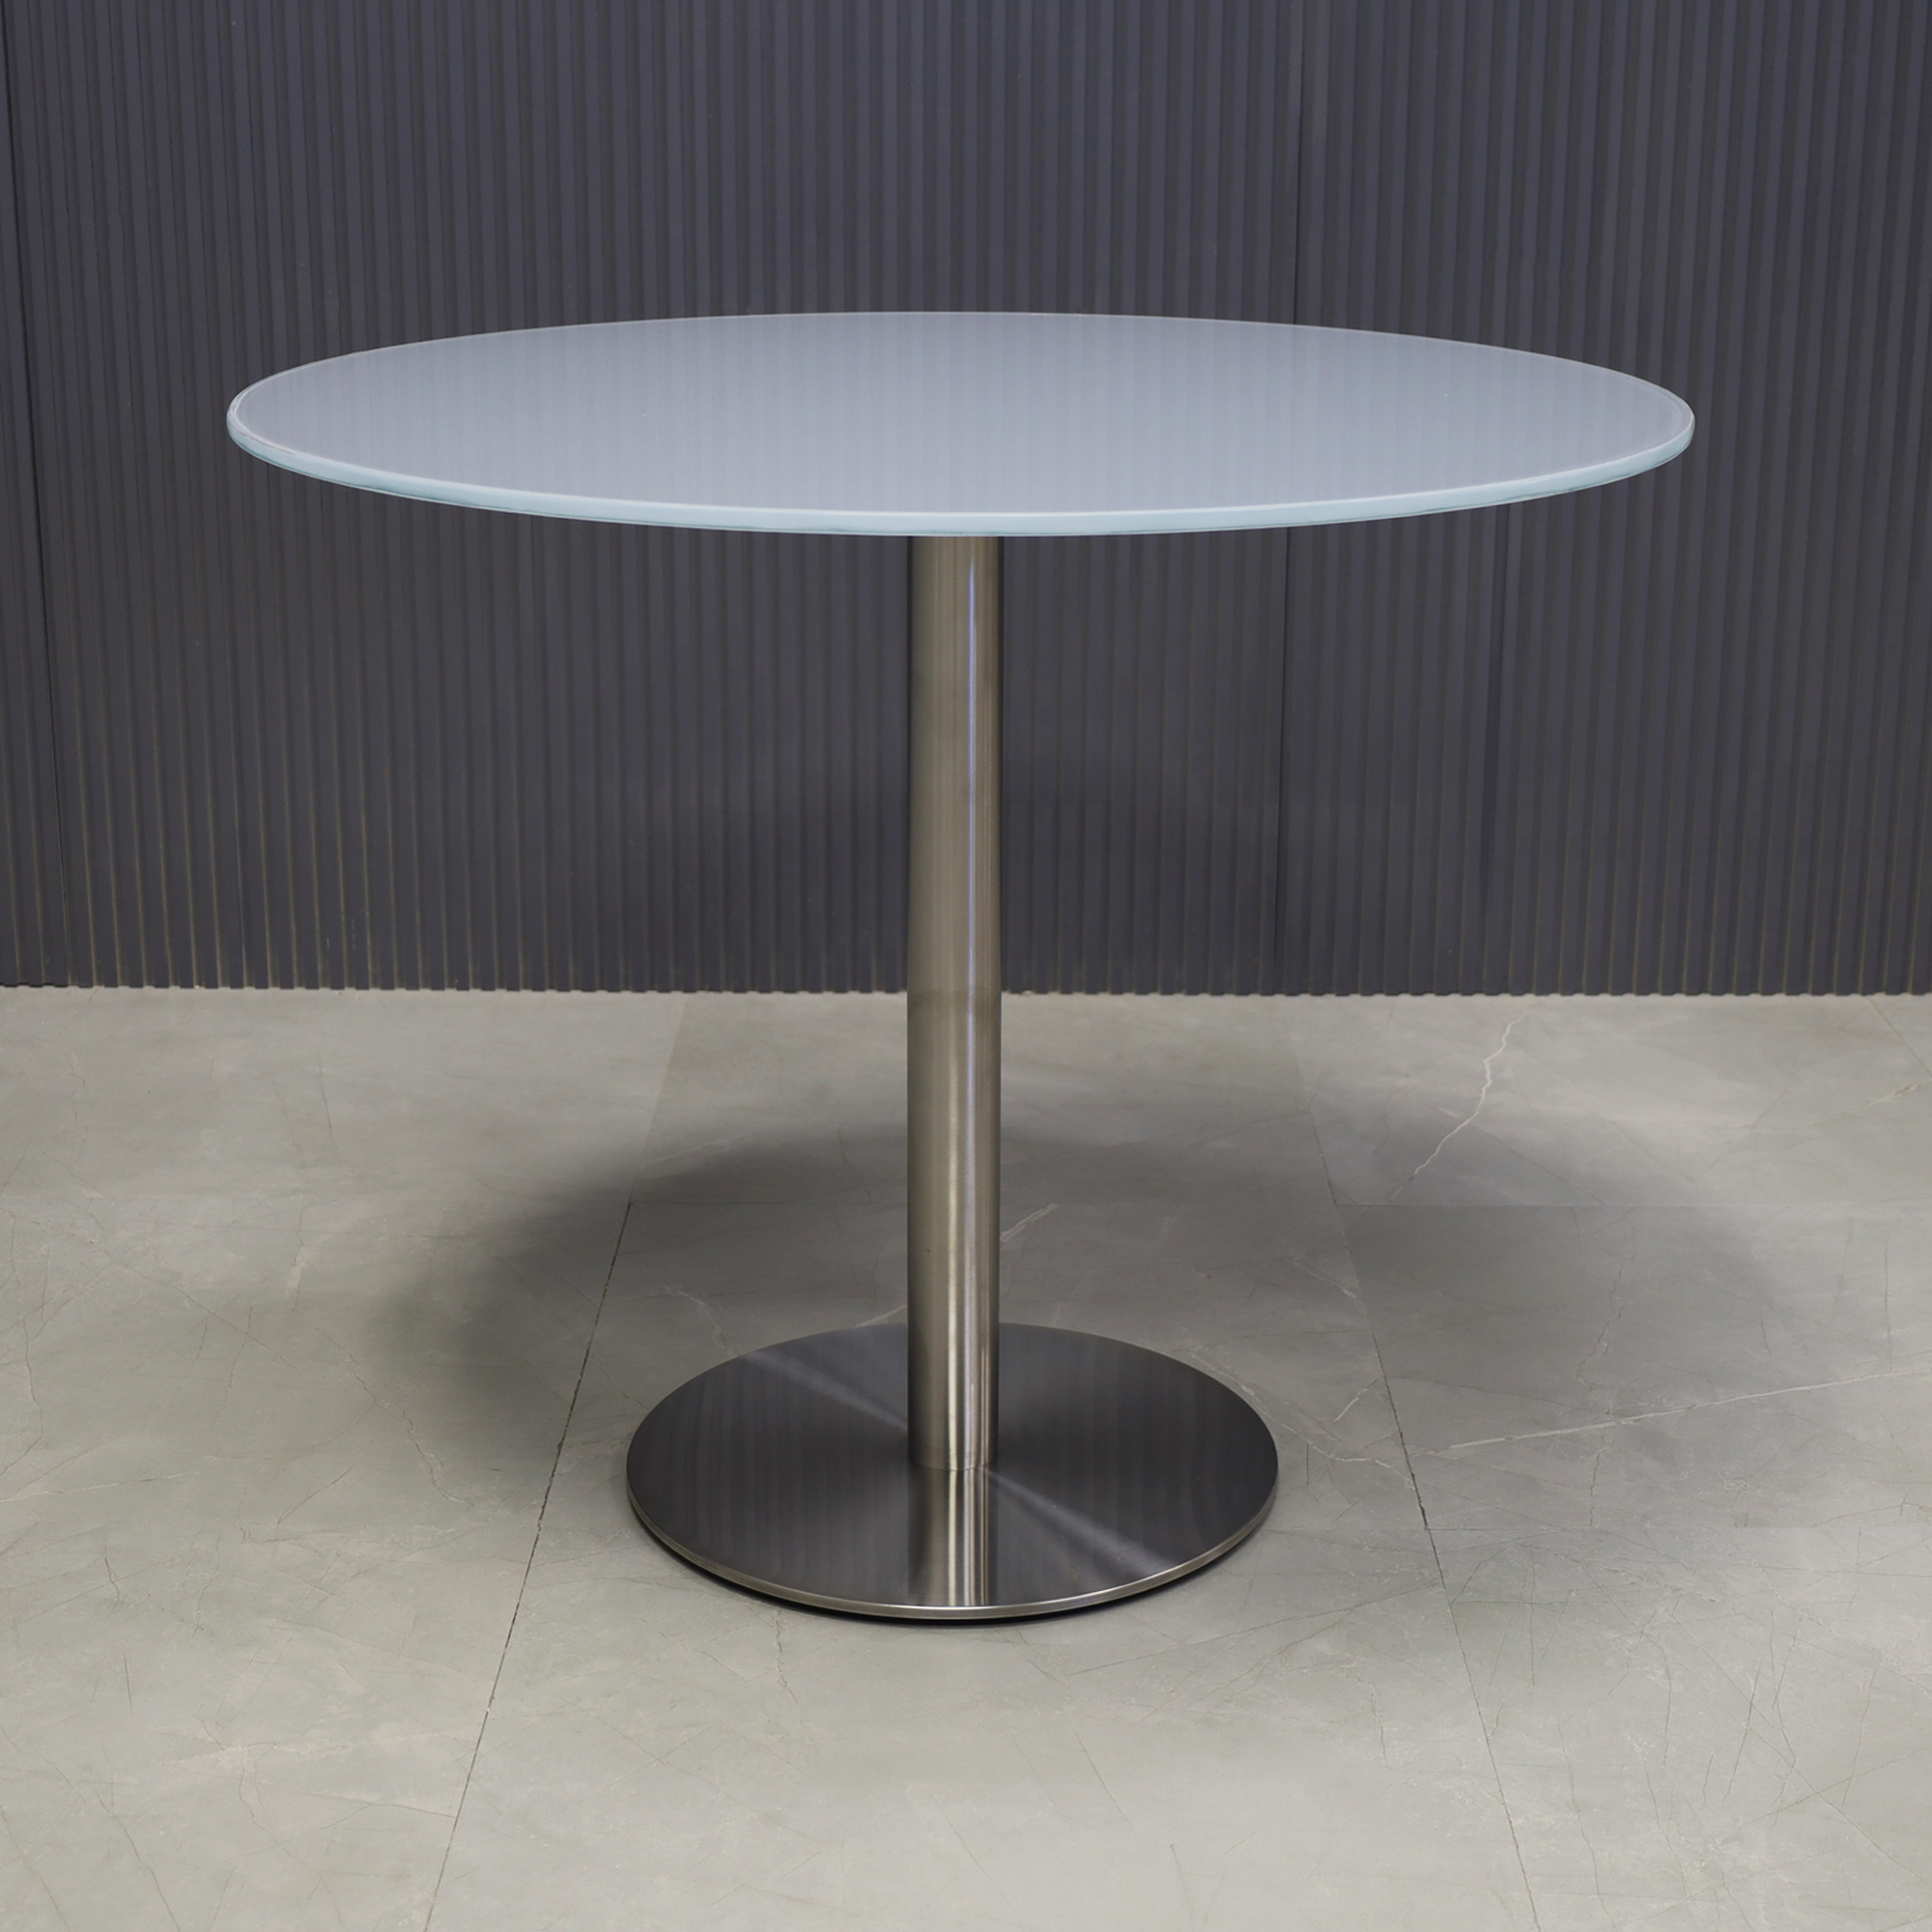 36-inch California Round Cafeteria Table in 1/2